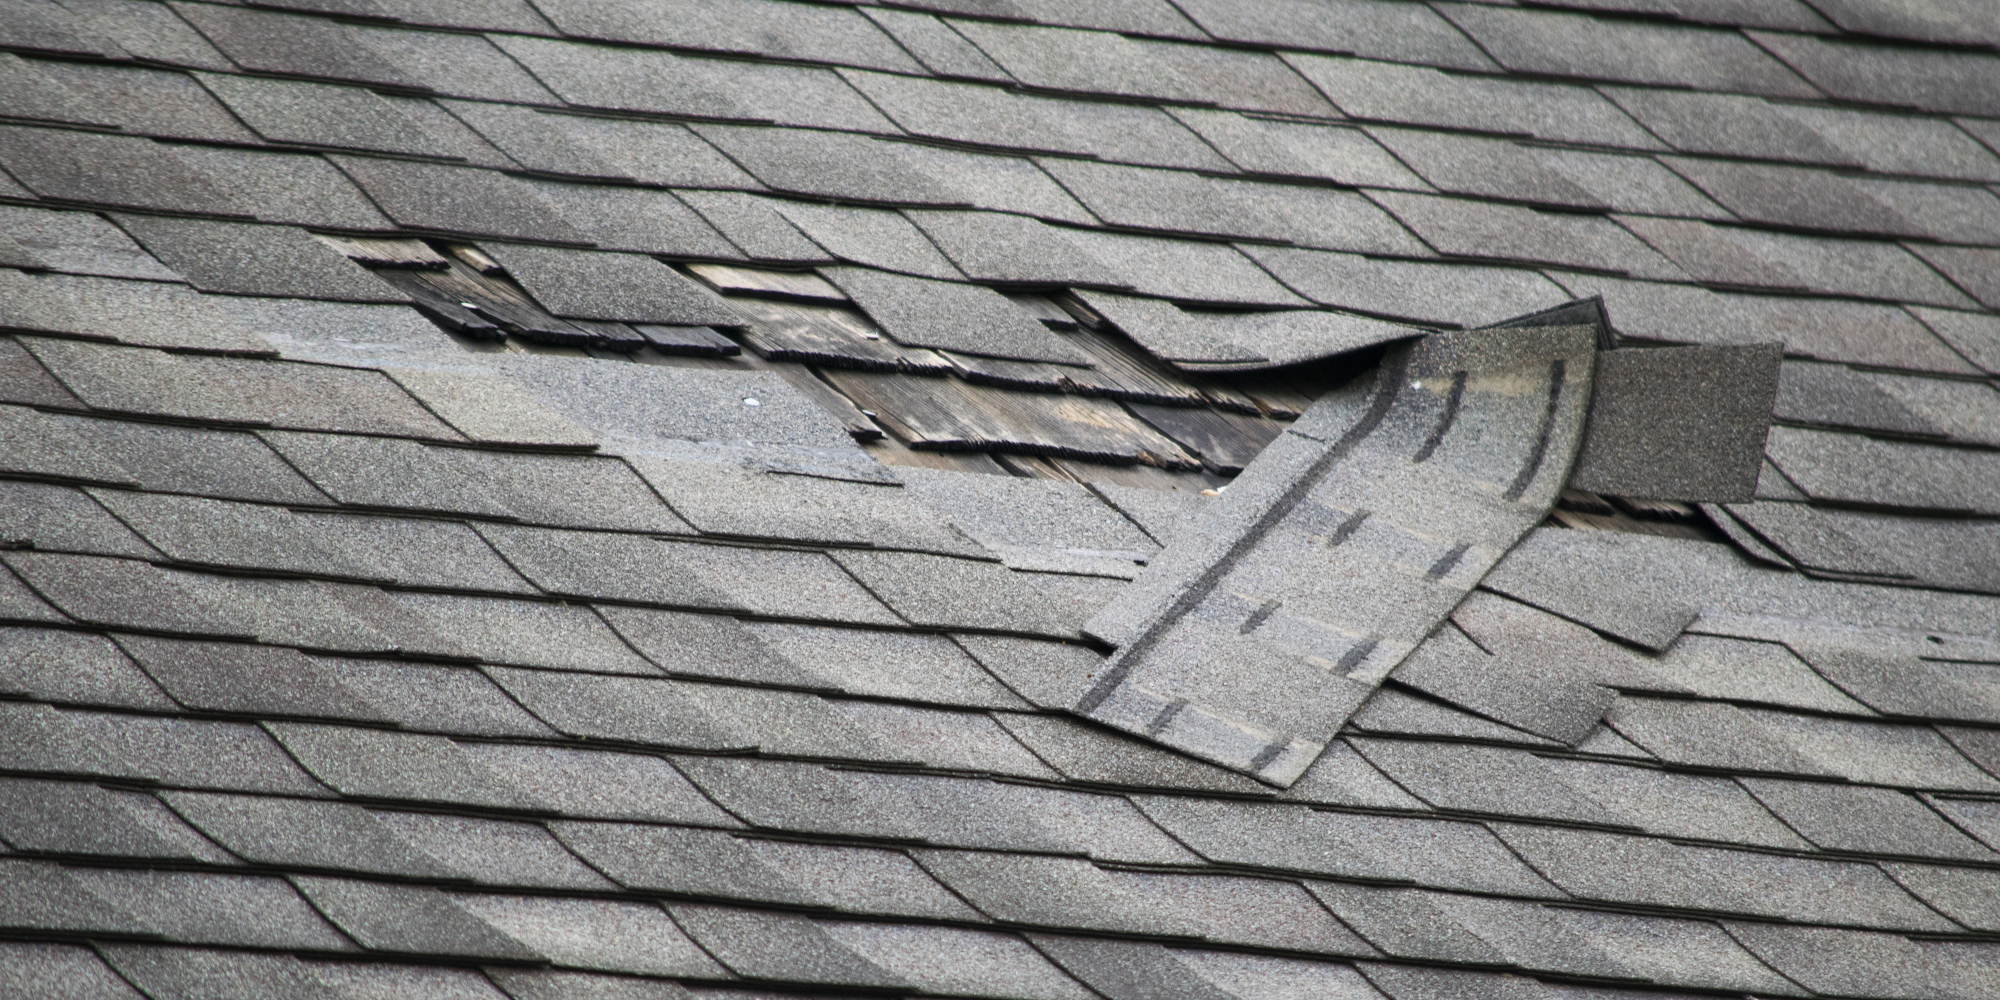 Hurricane & wind damage roof repairs, storm disaster recovery services, Cape Cod, South Coast MA